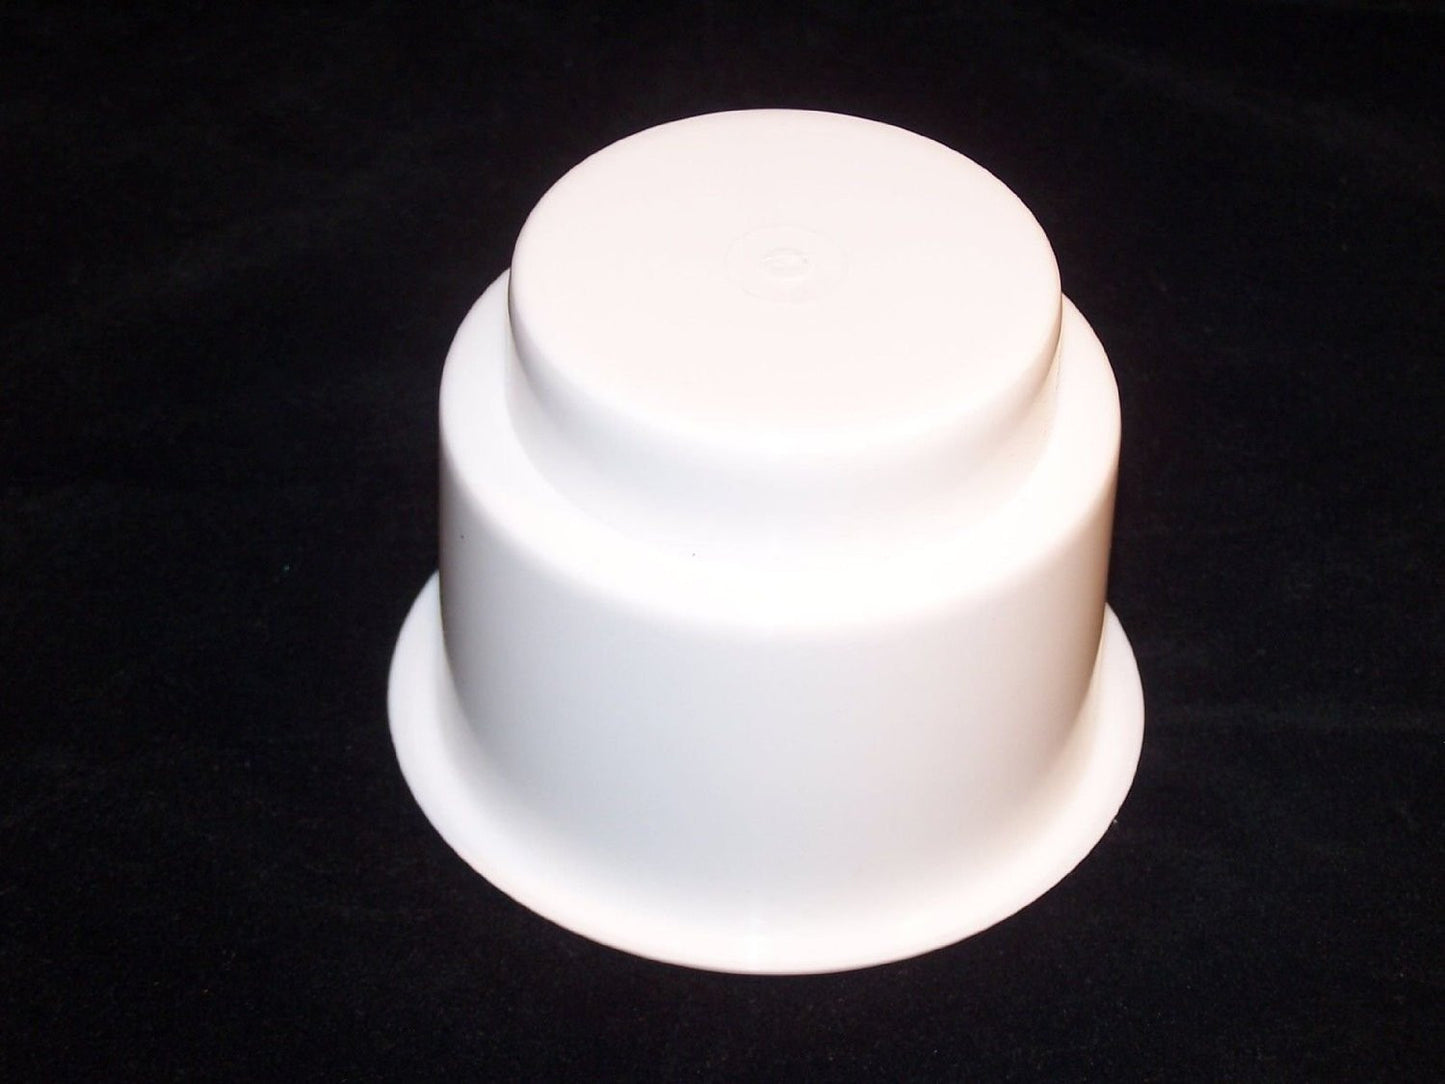 3 5/8 White Jumbo Cup Boat RV Car Truck Pool Table Sofa Inserts Large Size